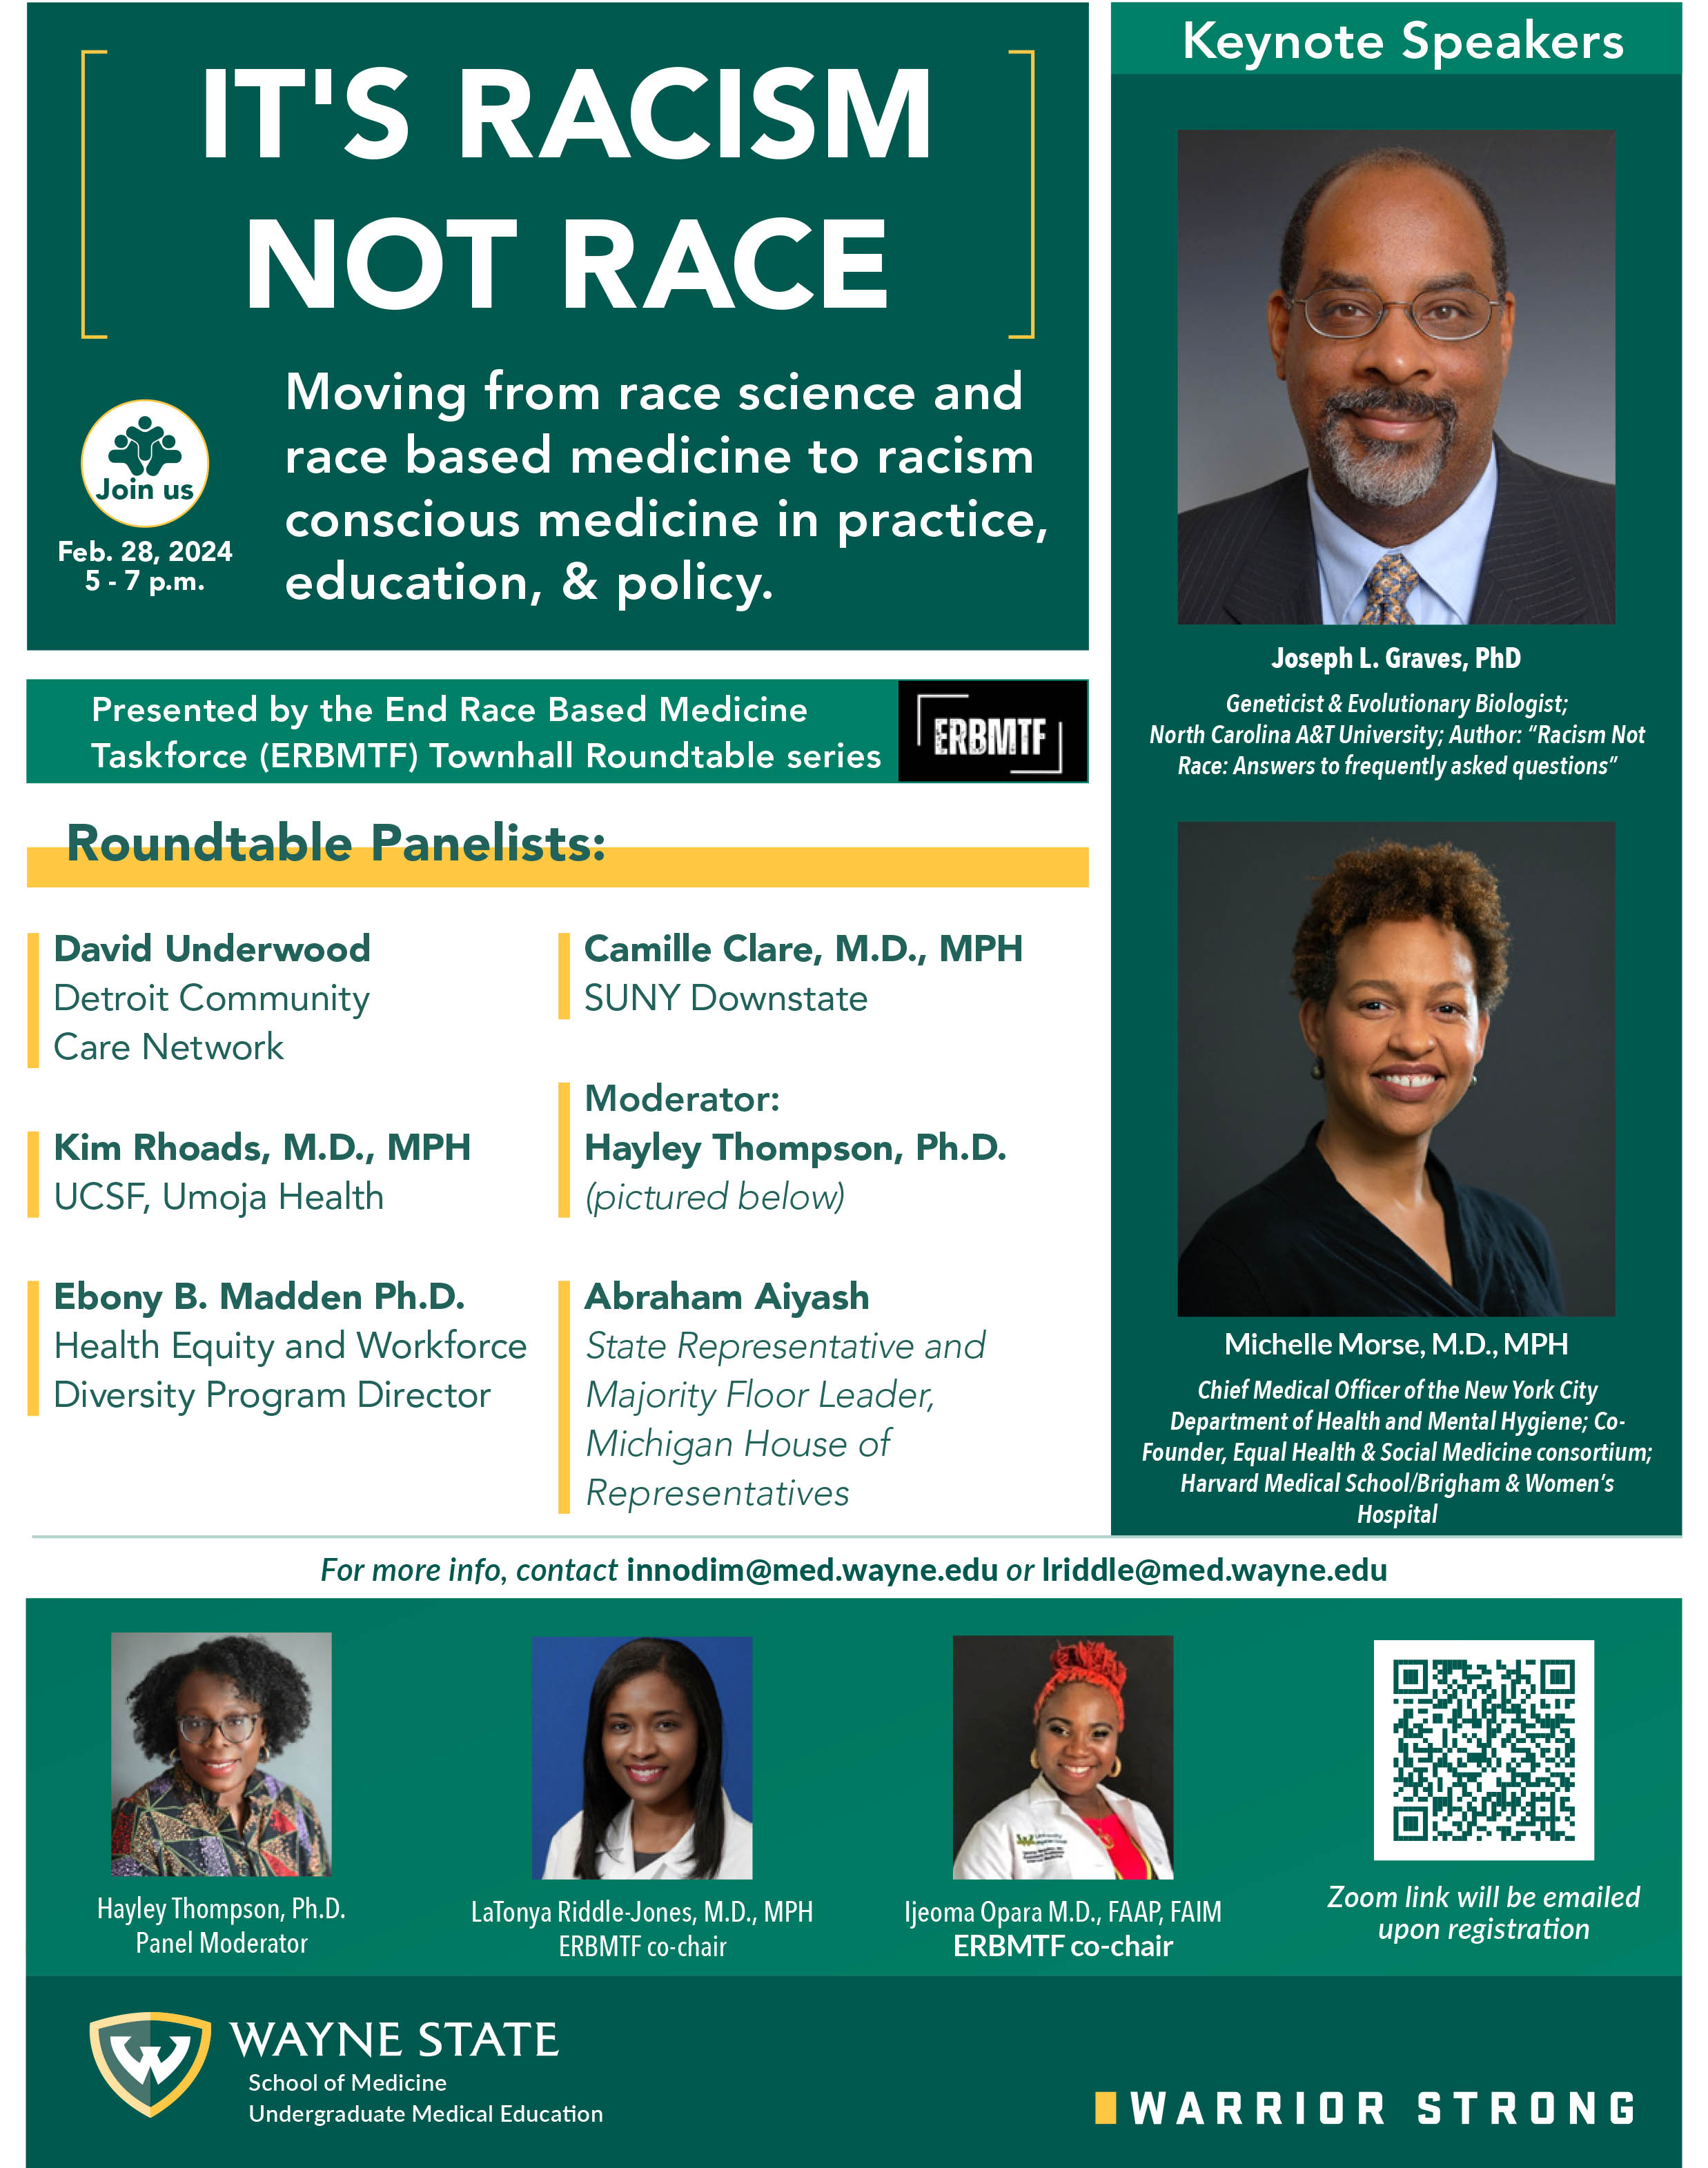 “It’s Racism Not Race” panel discussion